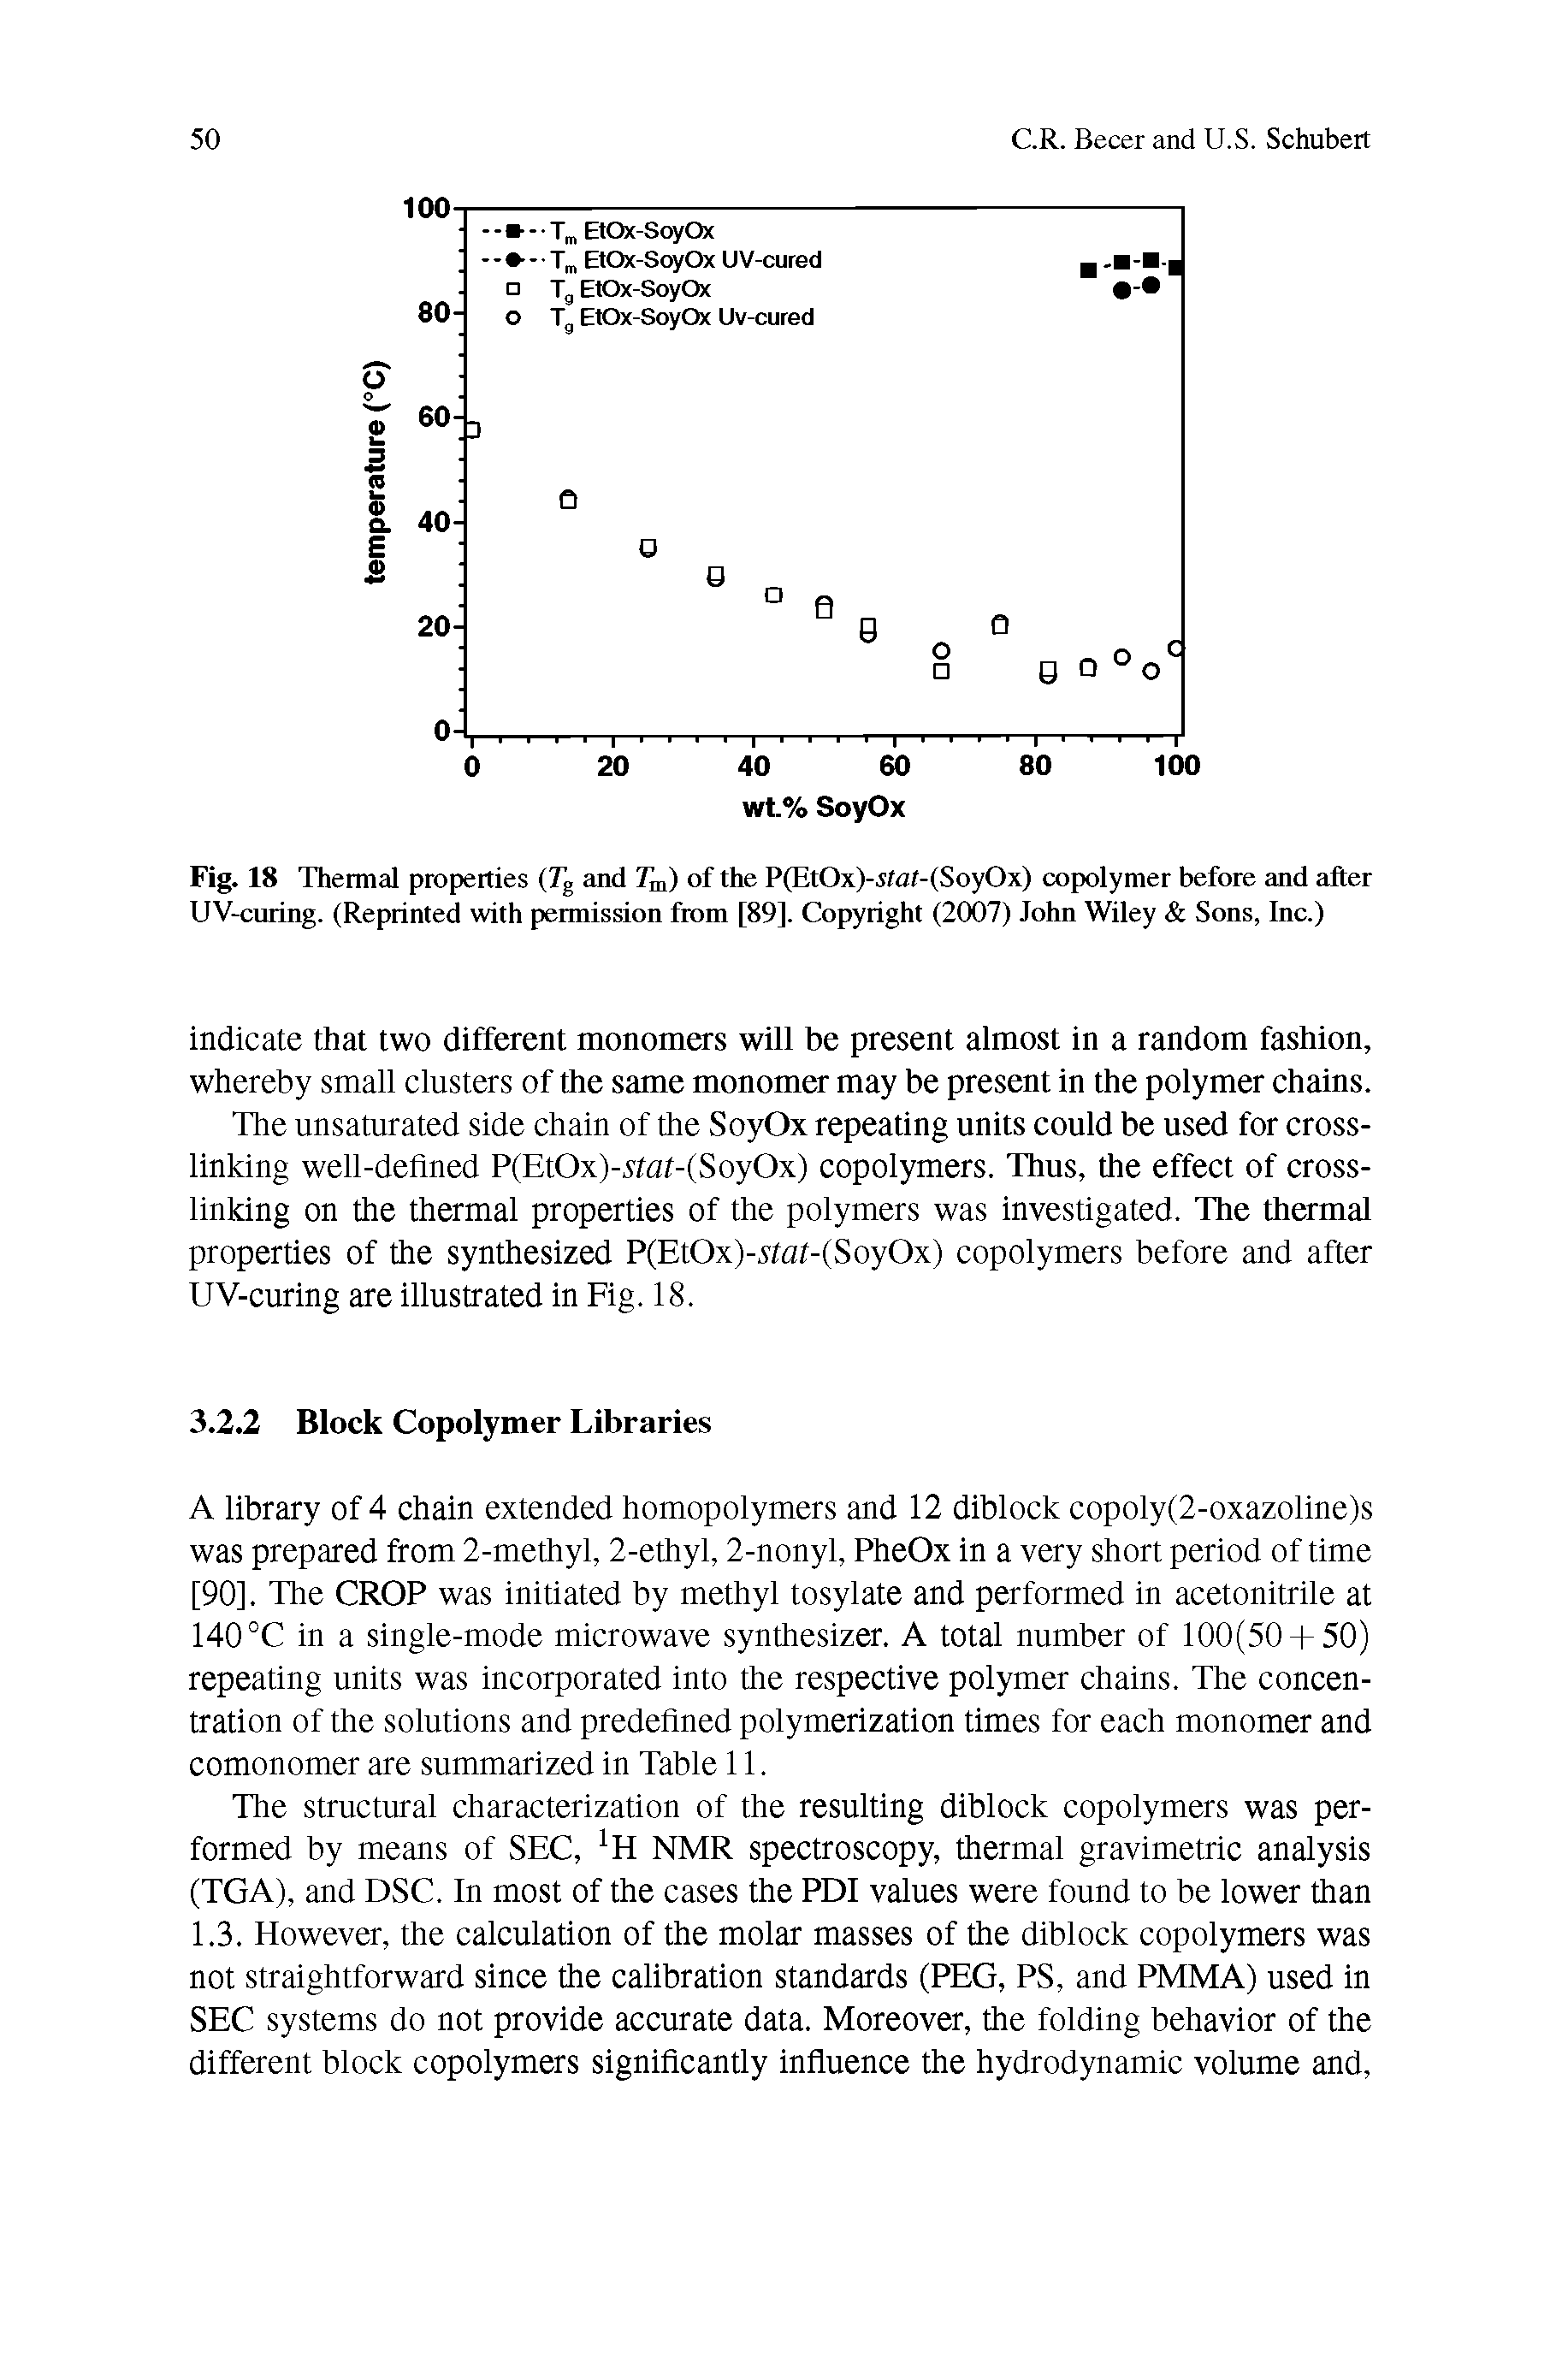 Fig. 18 Thermal properties (Tg and Tm) of the P(EtOx)-itot-(SoyOx) copolymer before and after UV-curing. (Reprinted with permission from [89]. Copyright (2007) John Wiley Sons, Inc.)...